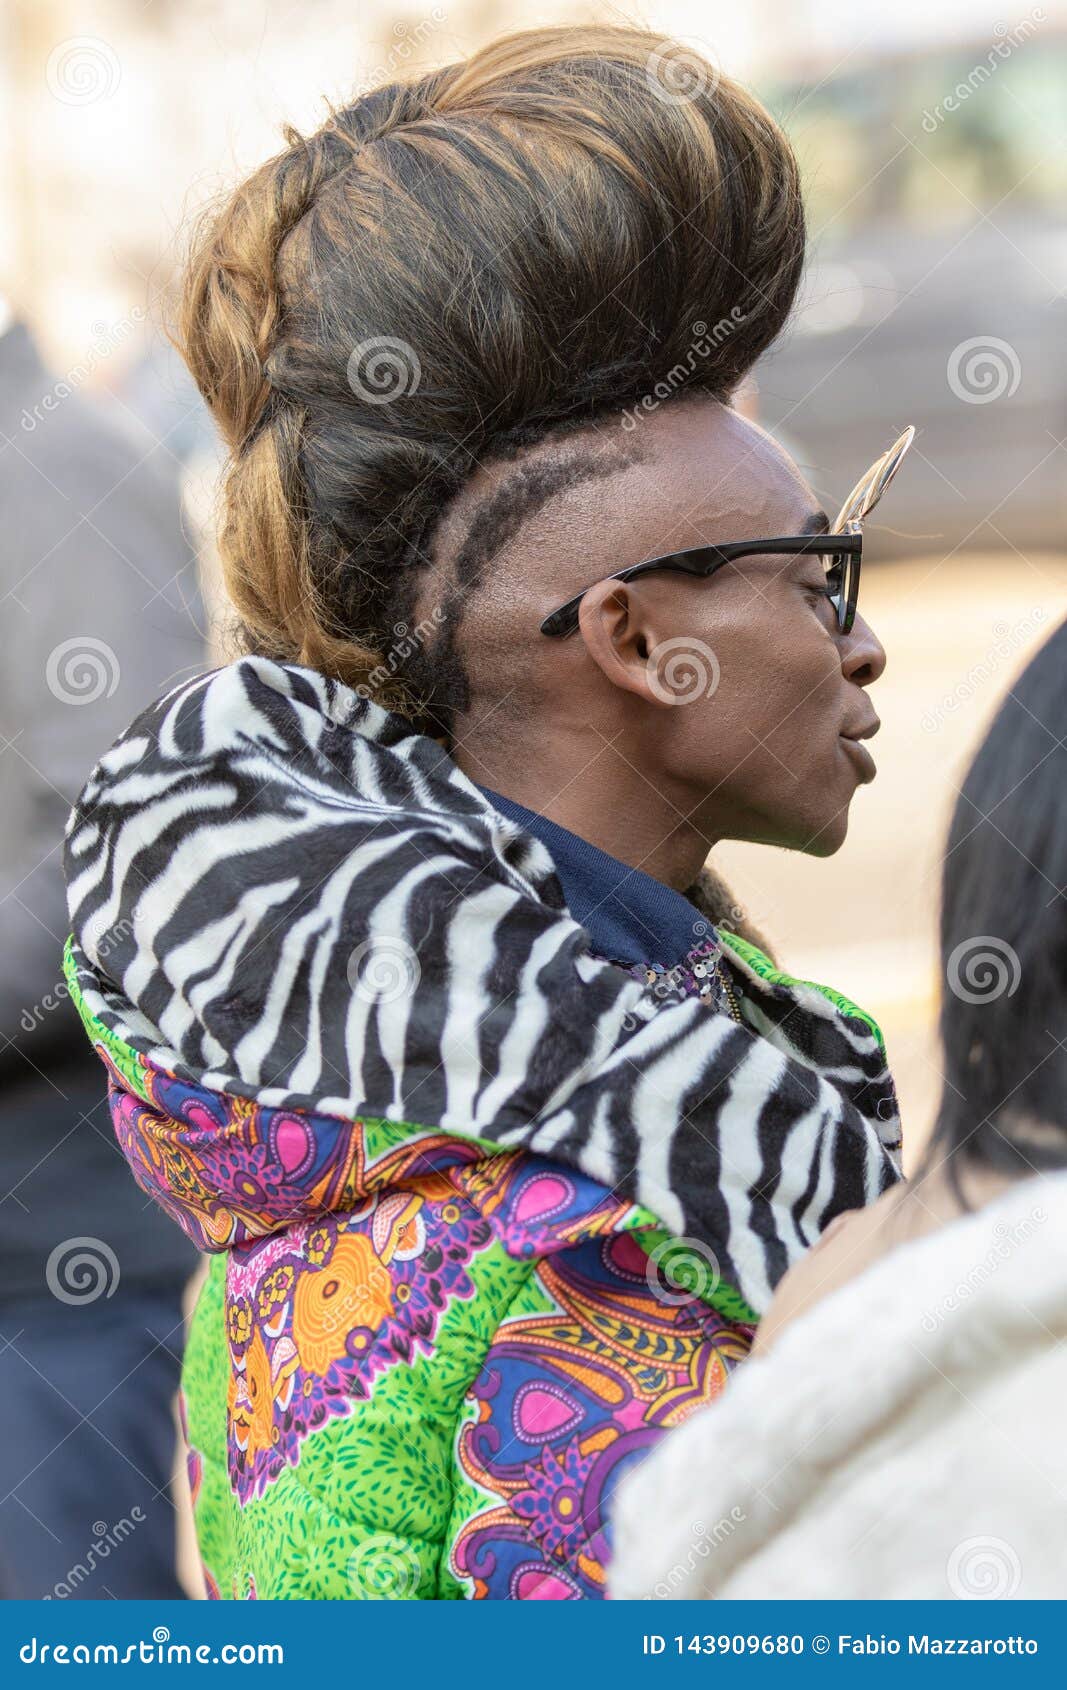 Model with an Original Hairstyle Wearing a Zebra Jacket Editorial Image -  Image of 20192020, collection: 143909680